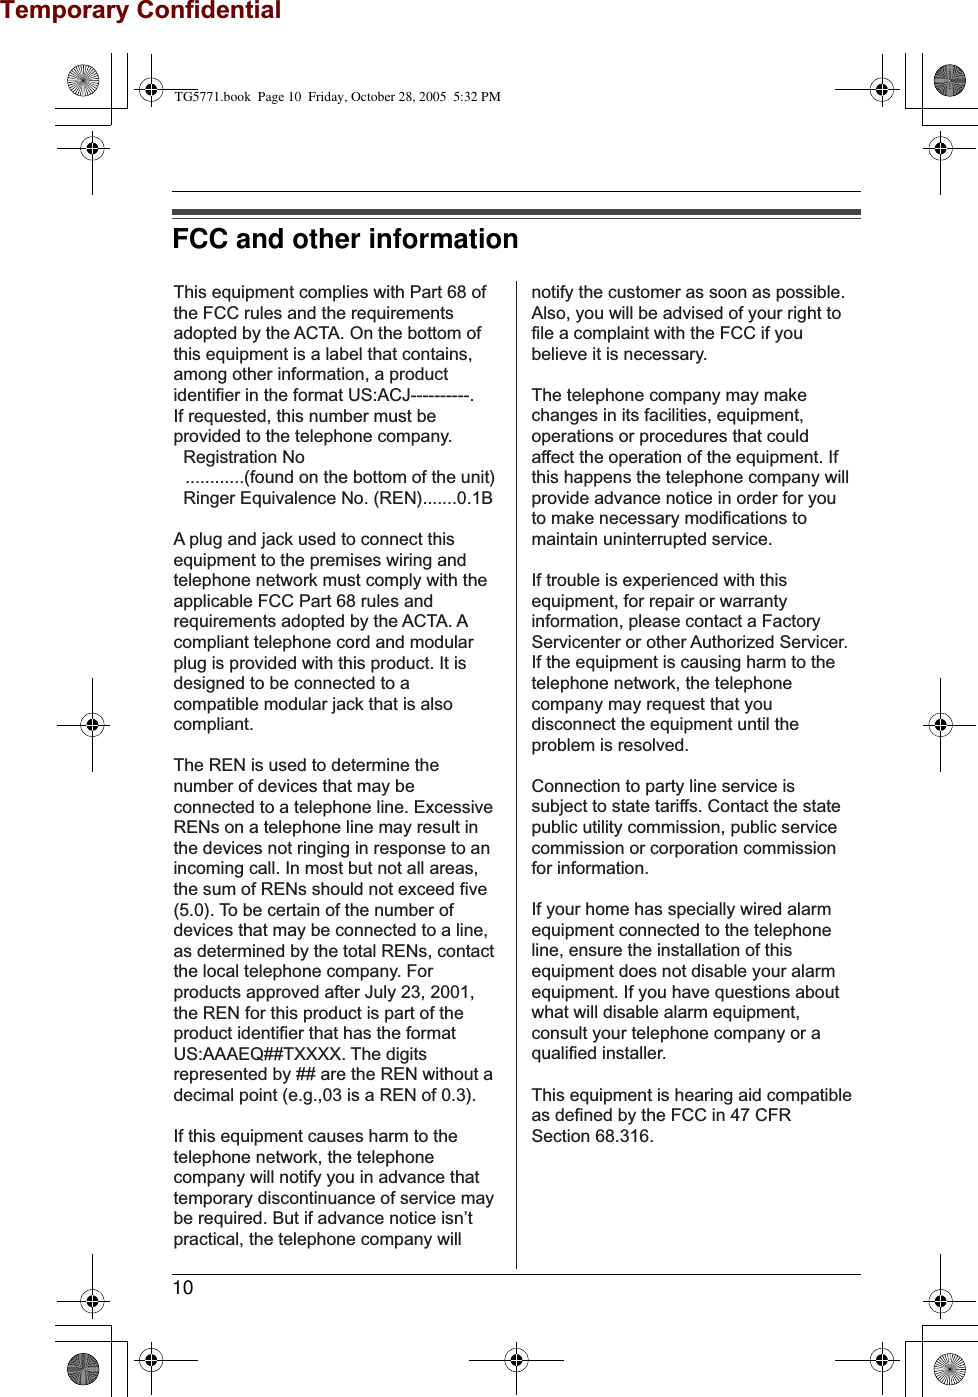 Temporary Confidential10FCC and other informationThis equipment complies with Part 68 of the FCC rules and the requirements adopted by the ACTA. On the bottom of this equipment is a label that contains, among other information, a product identifier in the format US:ACJ----------.If requested, this number must be provided to the telephone company. Registration No ............(found on the bottom of the unit) Ringer Equivalence No. (REN).......0.1BA plug and jack used to connect this equipment to the premises wiring and telephone network must comply with the applicable FCC Part 68 rules and requirements adopted by the ACTA. A compliant telephone cord and modular plug is provided with this product. It is designed to be connected to a compatible modular jack that is also compliant.The REN is used to determine the number of devices that may be connected to a telephone line. Excessive RENs on a telephone line may result in the devices not ringing in response to an incoming call. In most but not all areas, the sum of RENs should not exceed five (5.0). To be certain of the number of devices that may be connected to a line, as determined by the total RENs, contact the local telephone company. For products approved after July 23, 2001, the REN for this product is part of the product identifier that has the format US:AAAEQ##TXXXX. The digits represented by ## are the REN without a decimal point (e.g.,03 is a REN of 0.3).If this equipment causes harm to the telephone network, the telephone company will notify you in advance that  temporary discontinuance of service may be required. But if advance notice isn’t practical, the telephone company will notify the customer as soon as possible. Also, you will be advised of your right to file a complaint with the FCC if you believe it is necessary.The telephone company may make changes in its facilities, equipment, operations or procedures that could affect the operation of the equipment. If this happens the telephone company will provide advance notice in order for you to make necessary modifications to maintain uninterrupted service.If trouble is experienced with this equipment, for repair or warranty information, please contact a Factory Servicenter or other Authorized Servicer. If the equipment is causing harm to the telephone network, the telephone company may request that you disconnect the equipment until the problem is resolved.Connection to party line service is subject to state tariffs. Contact the state public utility commission, public service commission or corporation commission for information.If your home has specially wired alarm equipment connected to the telephone line, ensure the installation of this equipment does not disable your alarm equipment. If you have questions about what will disable alarm equipment, consult your telephone company or a qualified installer.This equipment is hearing aid compatible as defined by the FCC in 47 CFR Section 68.316.TG5771.book  Page 10  Friday, October 28, 2005  5:32 PM